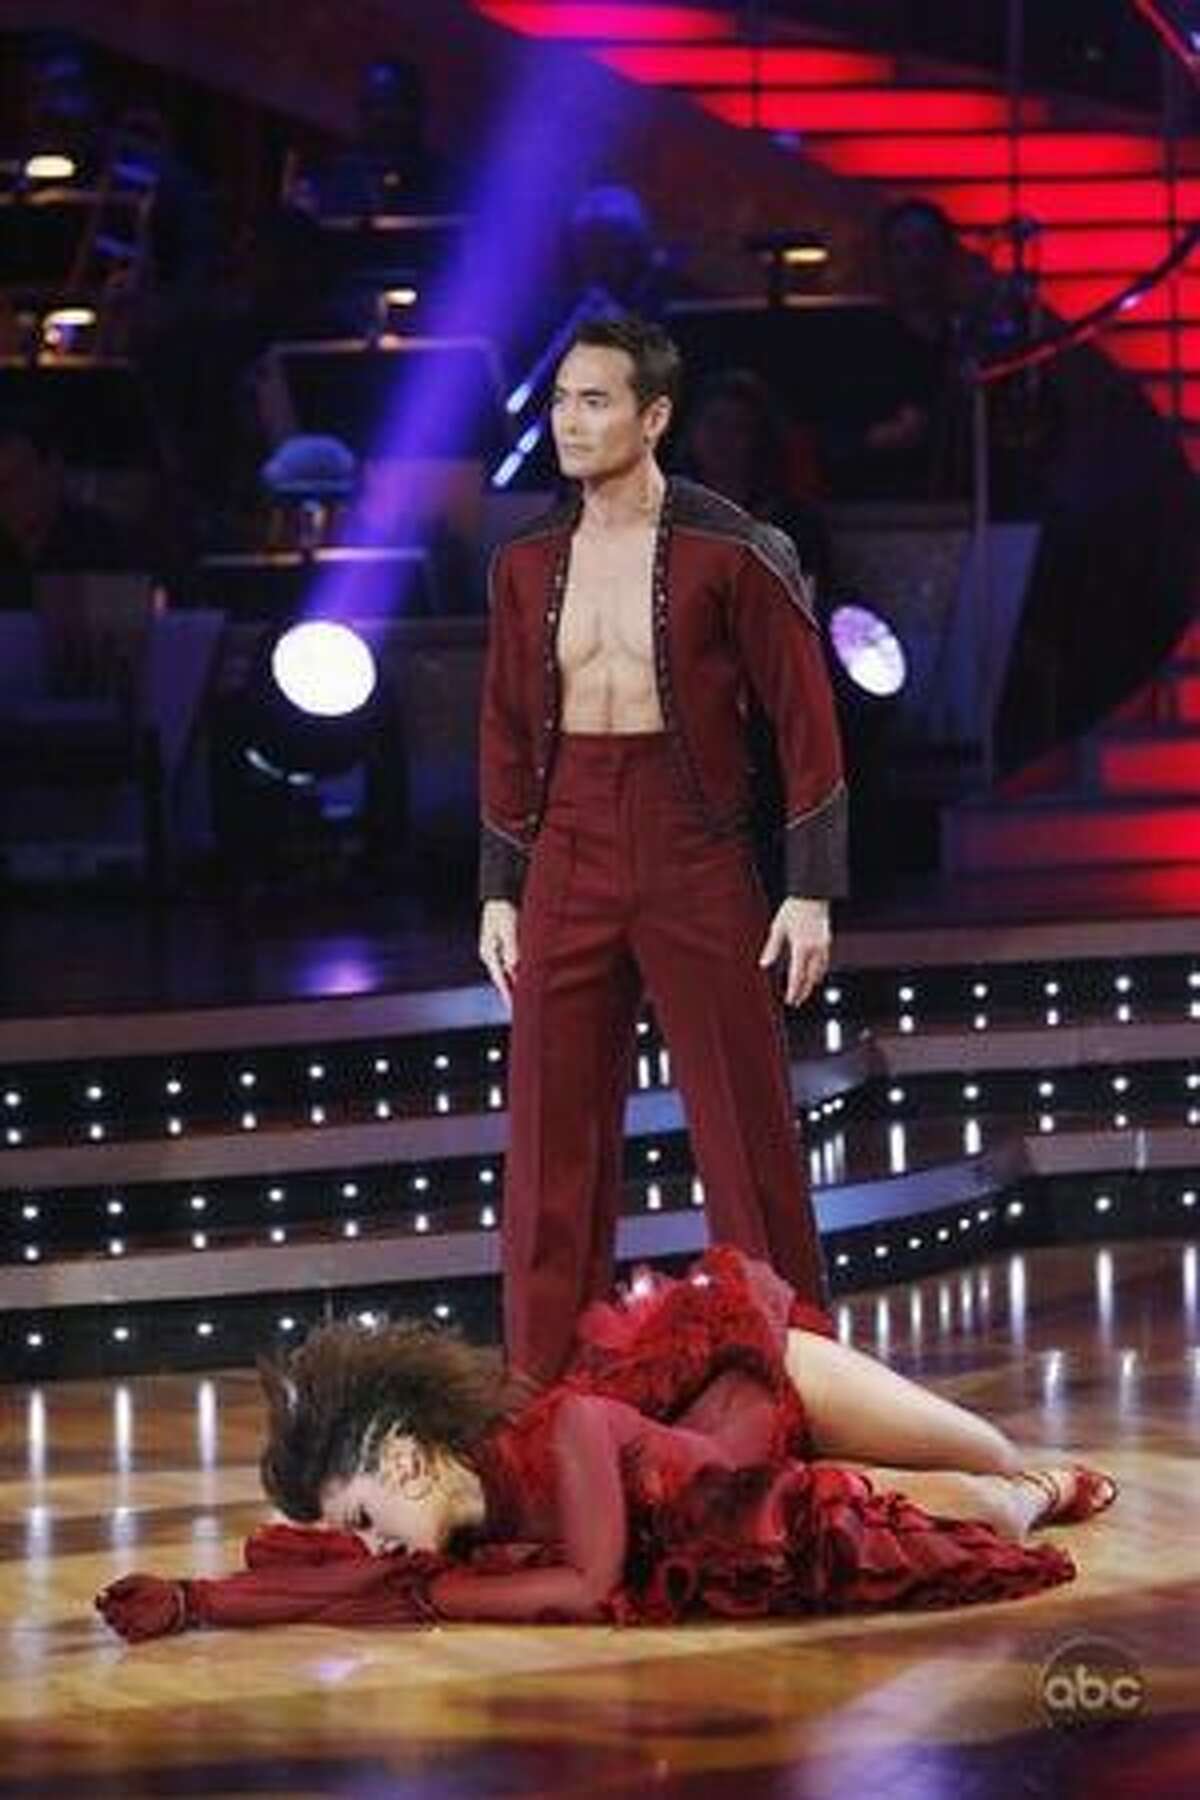 Professional dancer Lacey Schwimmer and actor Mark Dacascos.